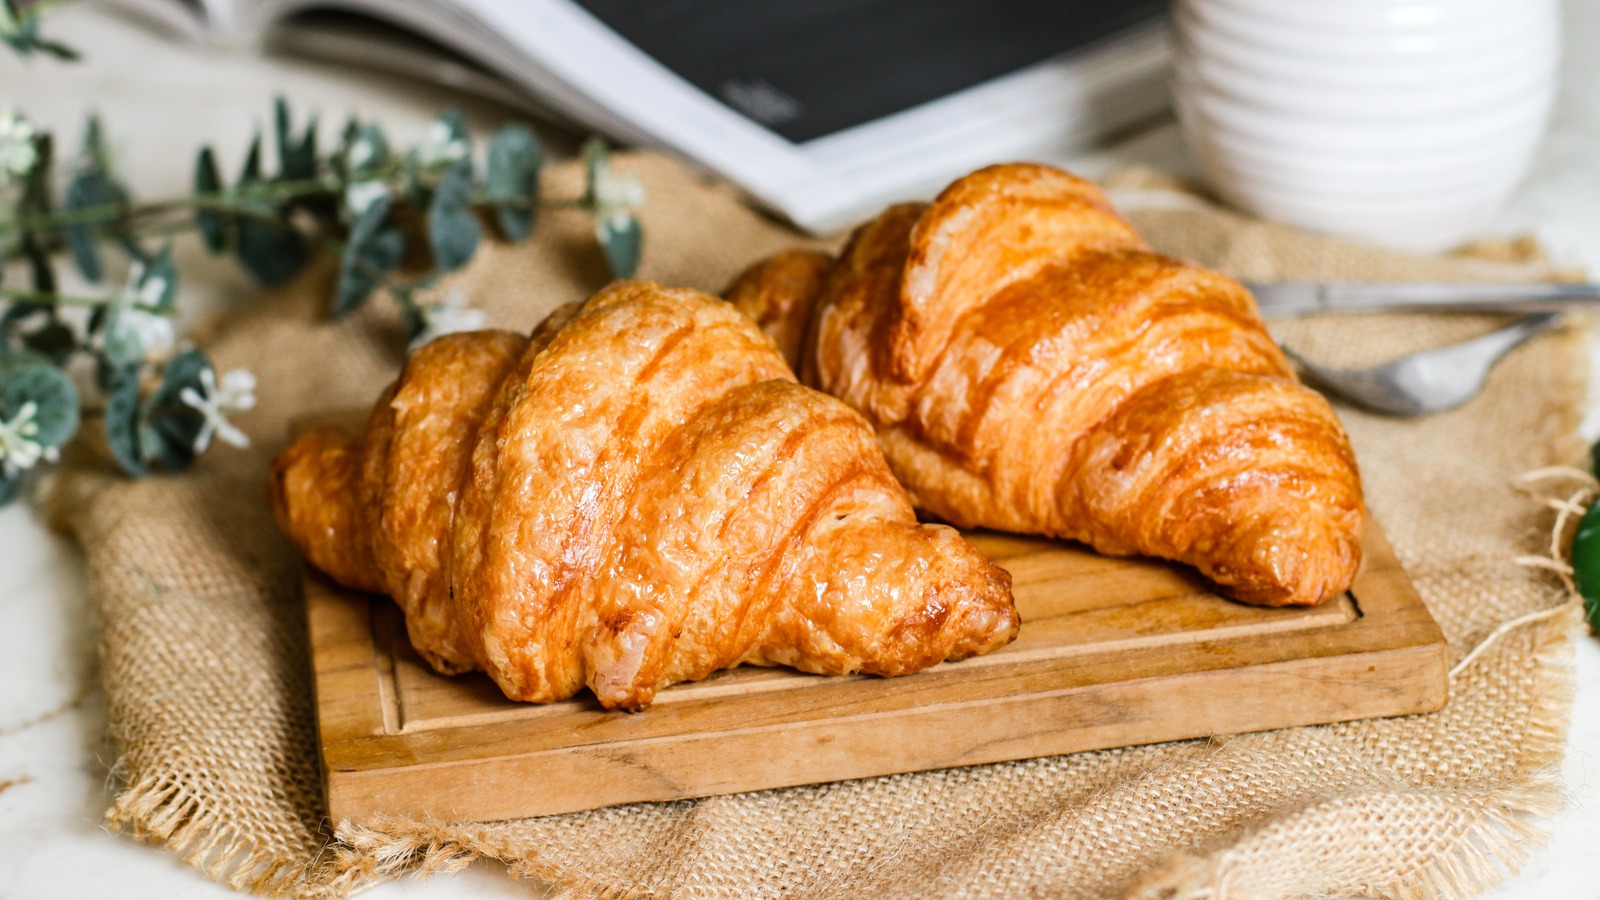 https://www.thedailymeal.com/img/gallery/what-to-do-with-all-those-leftover-costco-croissants-according-to-tiktok/l-intro-1678299380.jpg